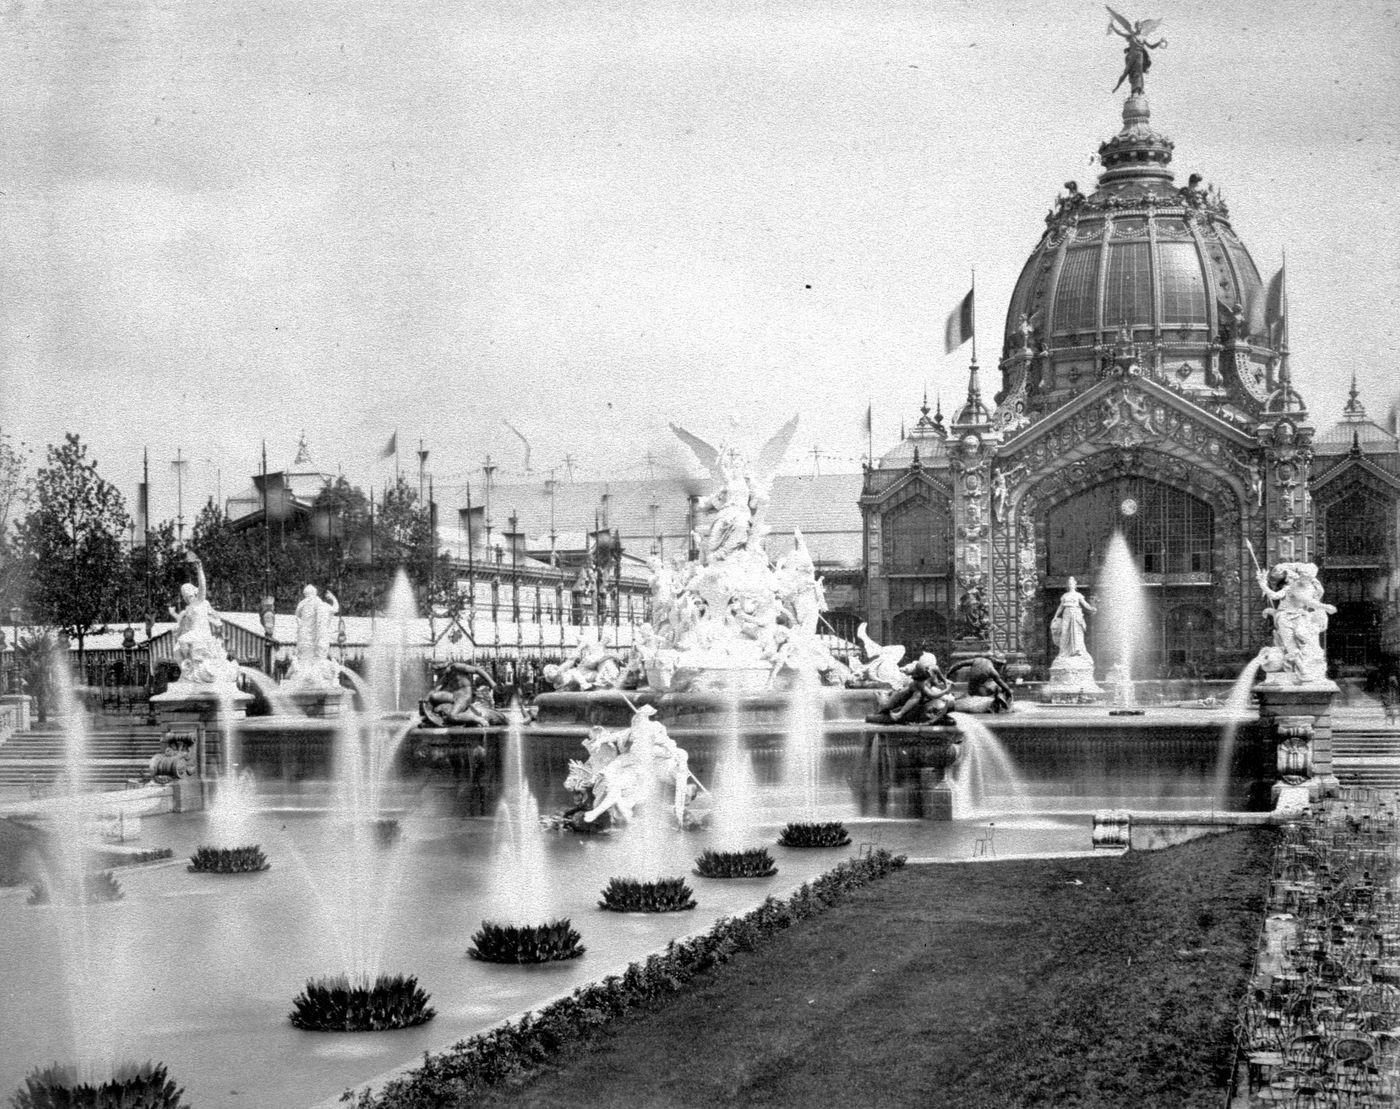 Exposition universelle de 1889 (Paris, France): View of fountain and domed building